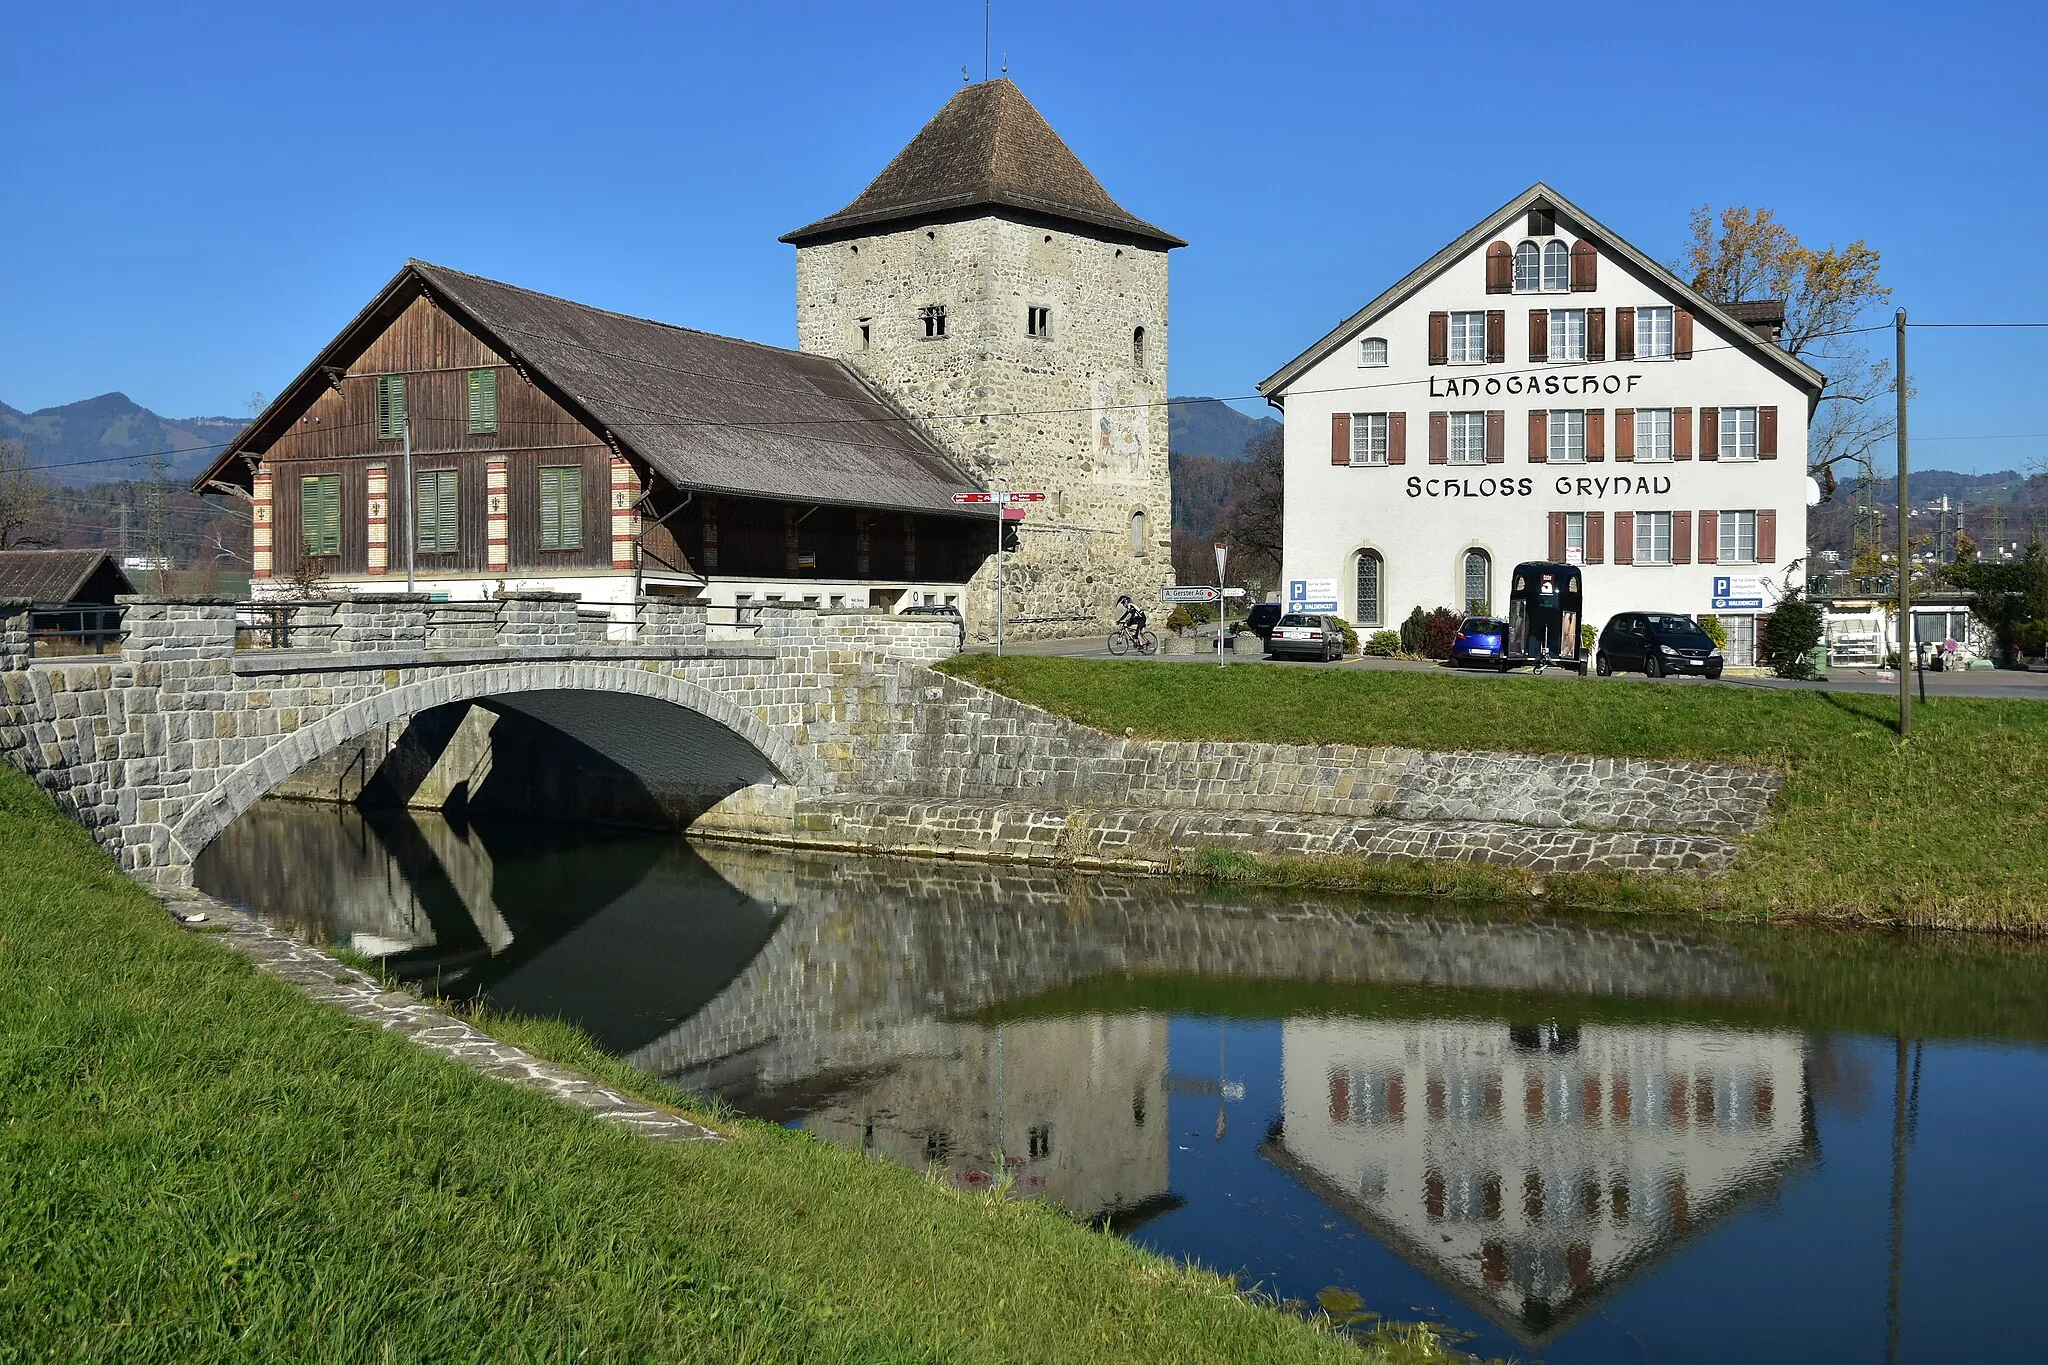 Photo showing: Grynau (Grinau or Schloss Grynau) is a castle tower, situated on the Linth canal in the Swiss municipality of Tuggen in the Canton of Schwyz, that was built by the House of Rapperswil in the early 13th century AD.